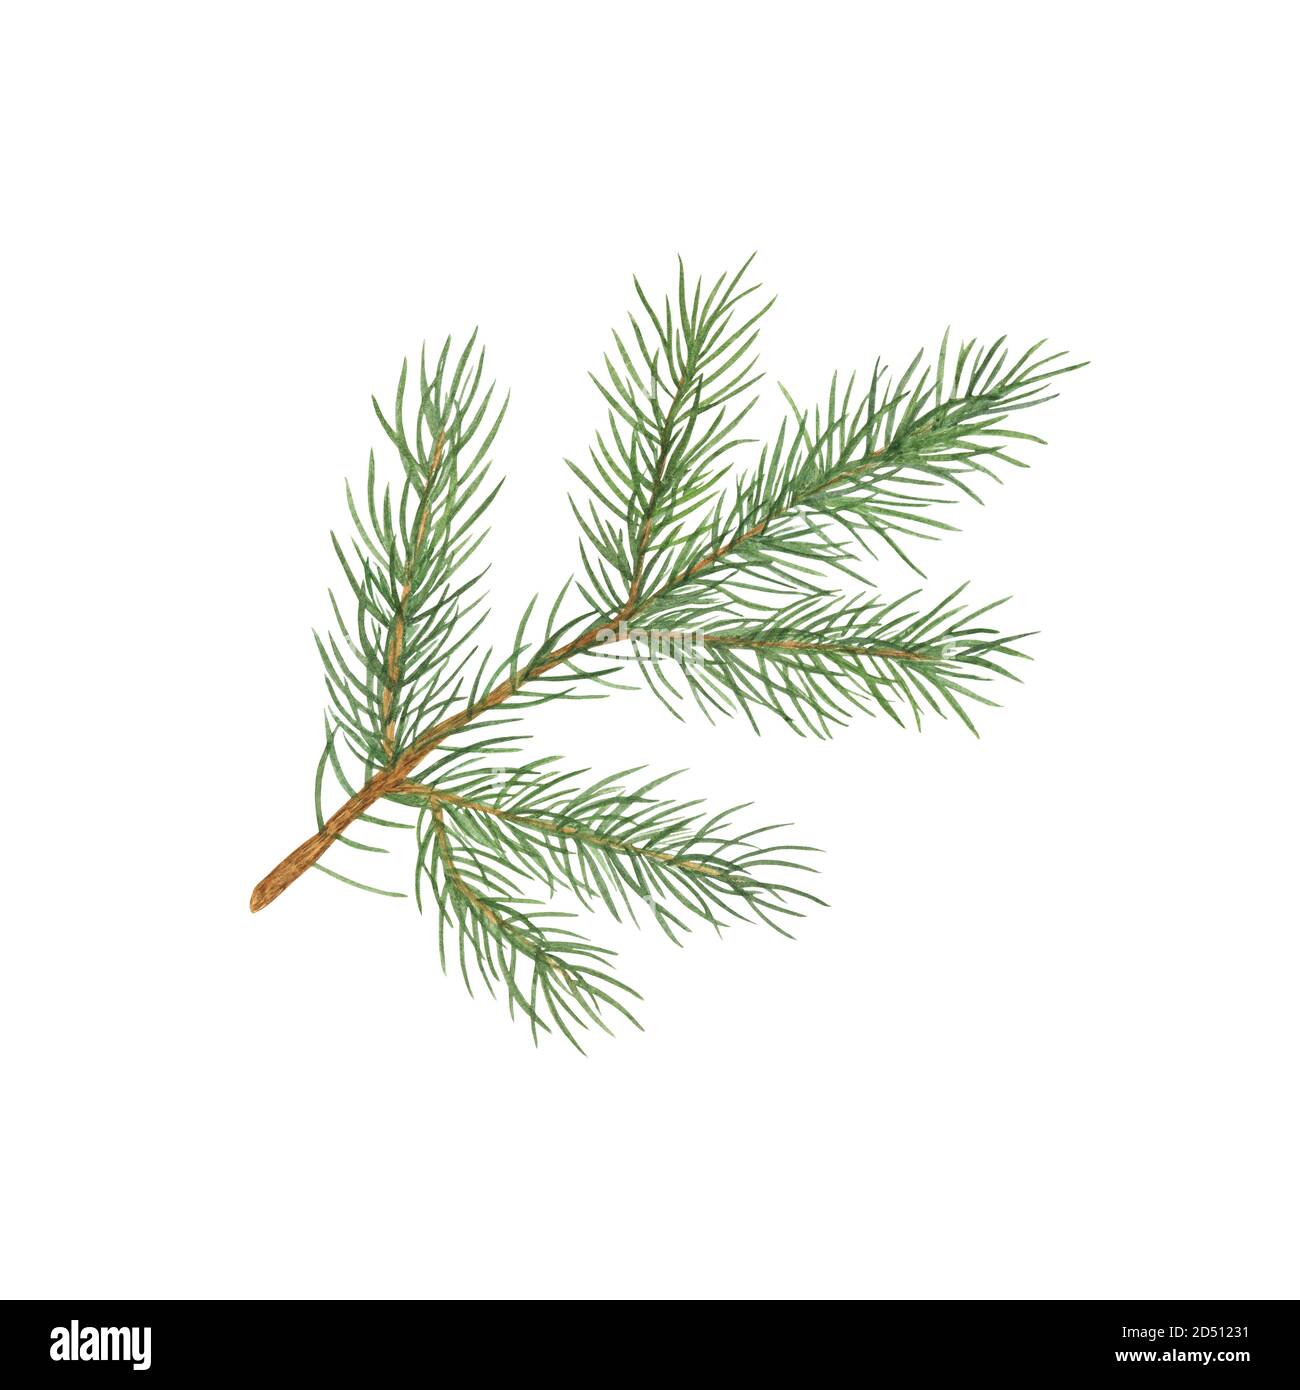 Fir tree branch isolated watercolor illustration simple hand drawn festive  mood pattern for greeting card, banner, winter holiday celebration design  Stock Photo - Alamy